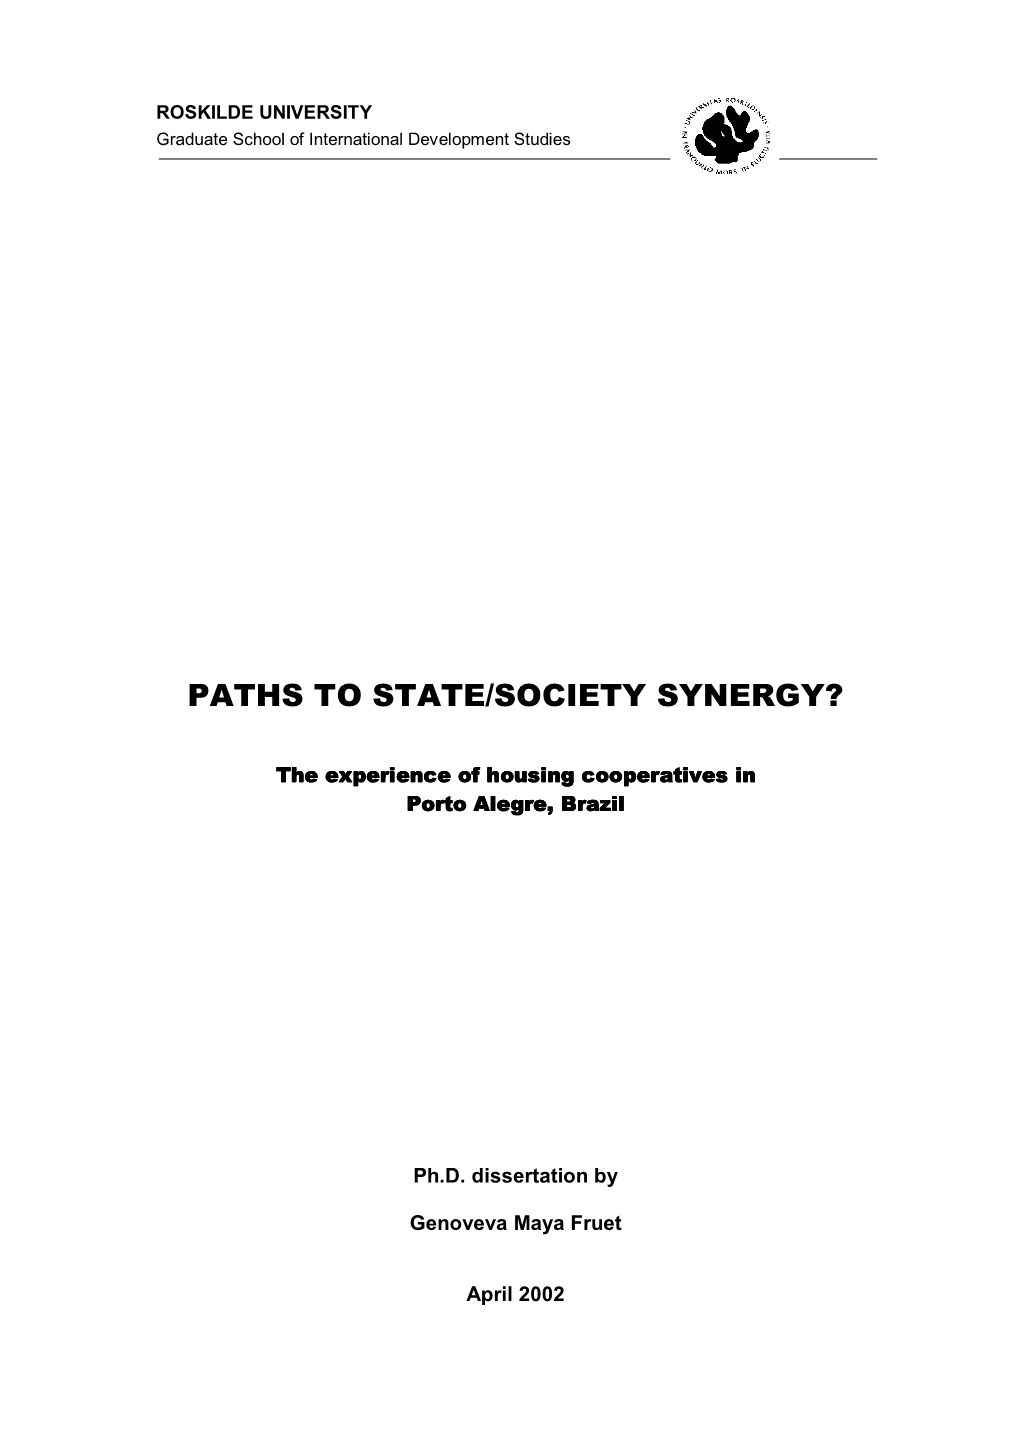 Paths to State/Society Synergy?